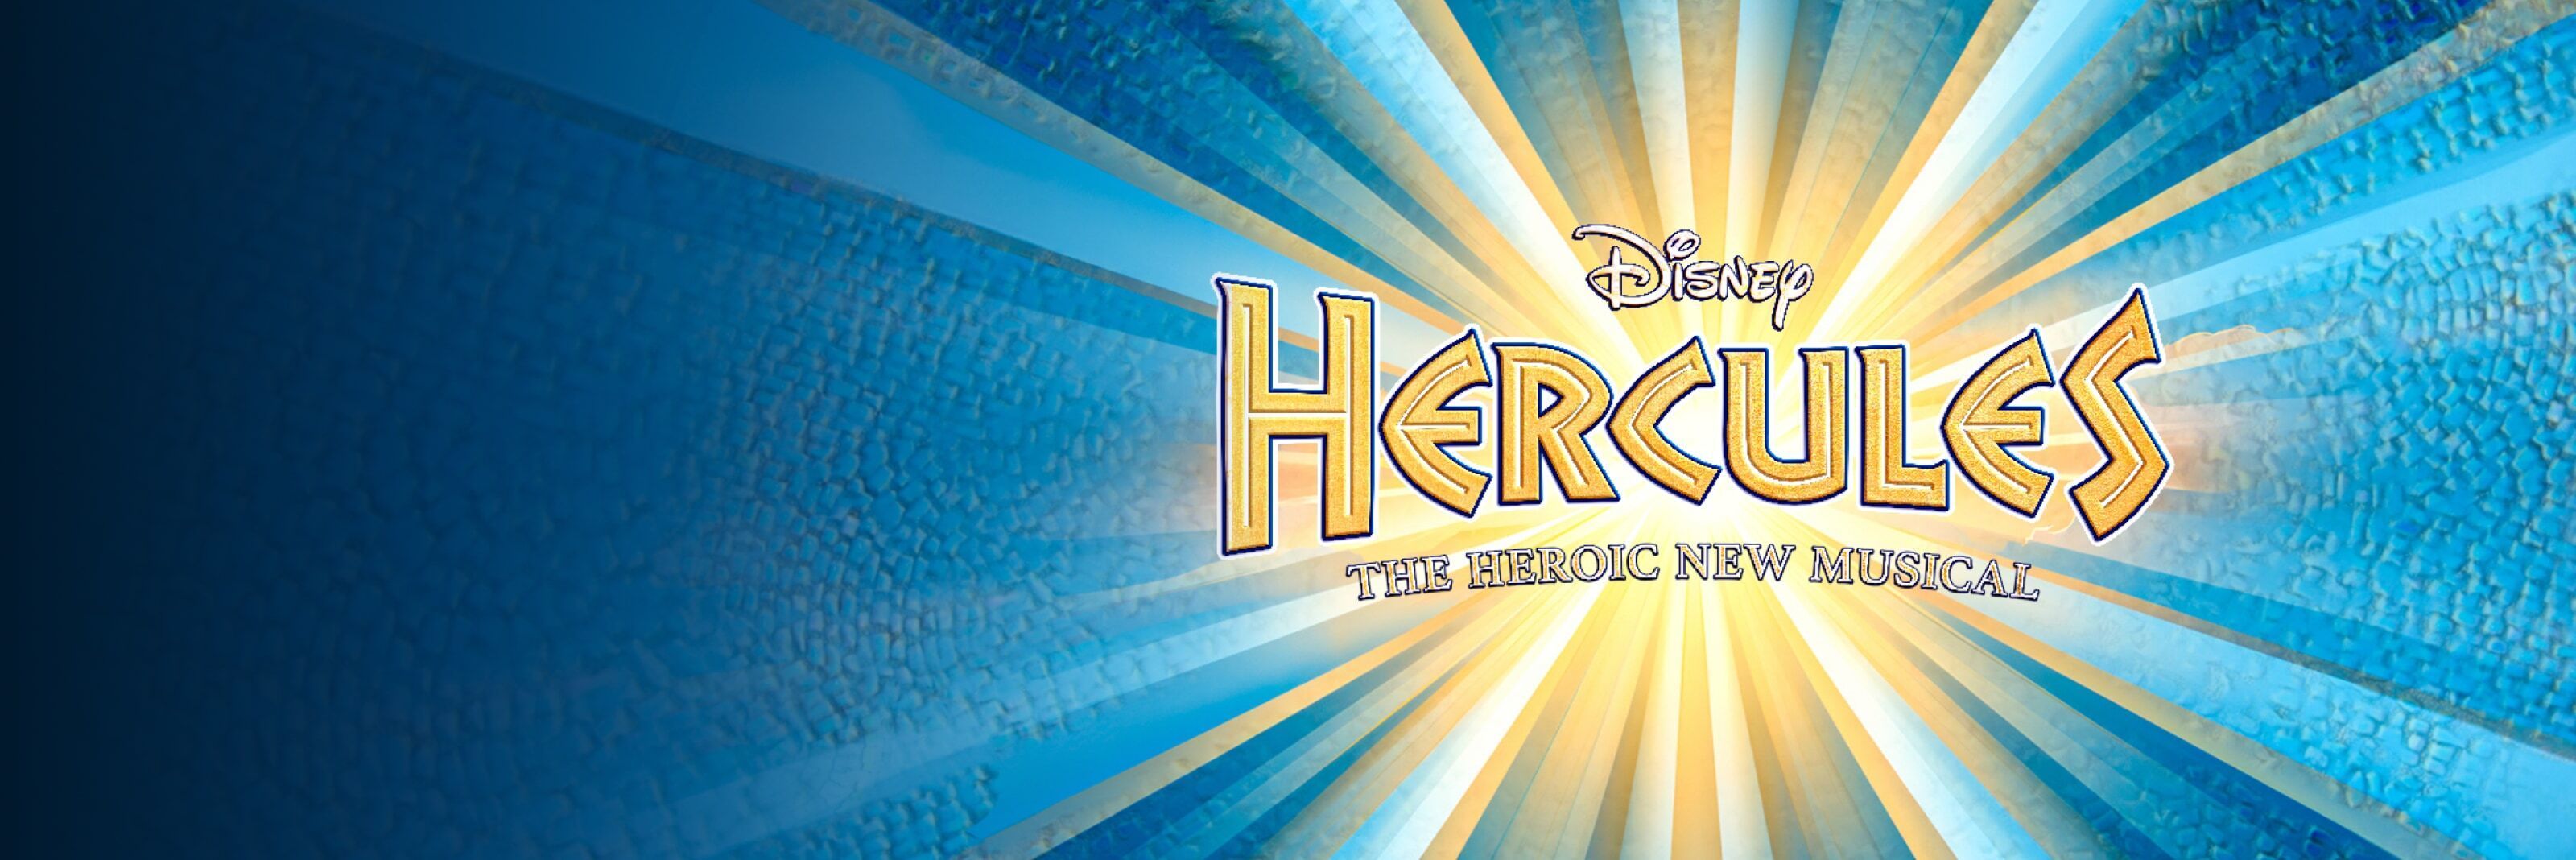 Find out more about Hercules - The Heroic New Musical